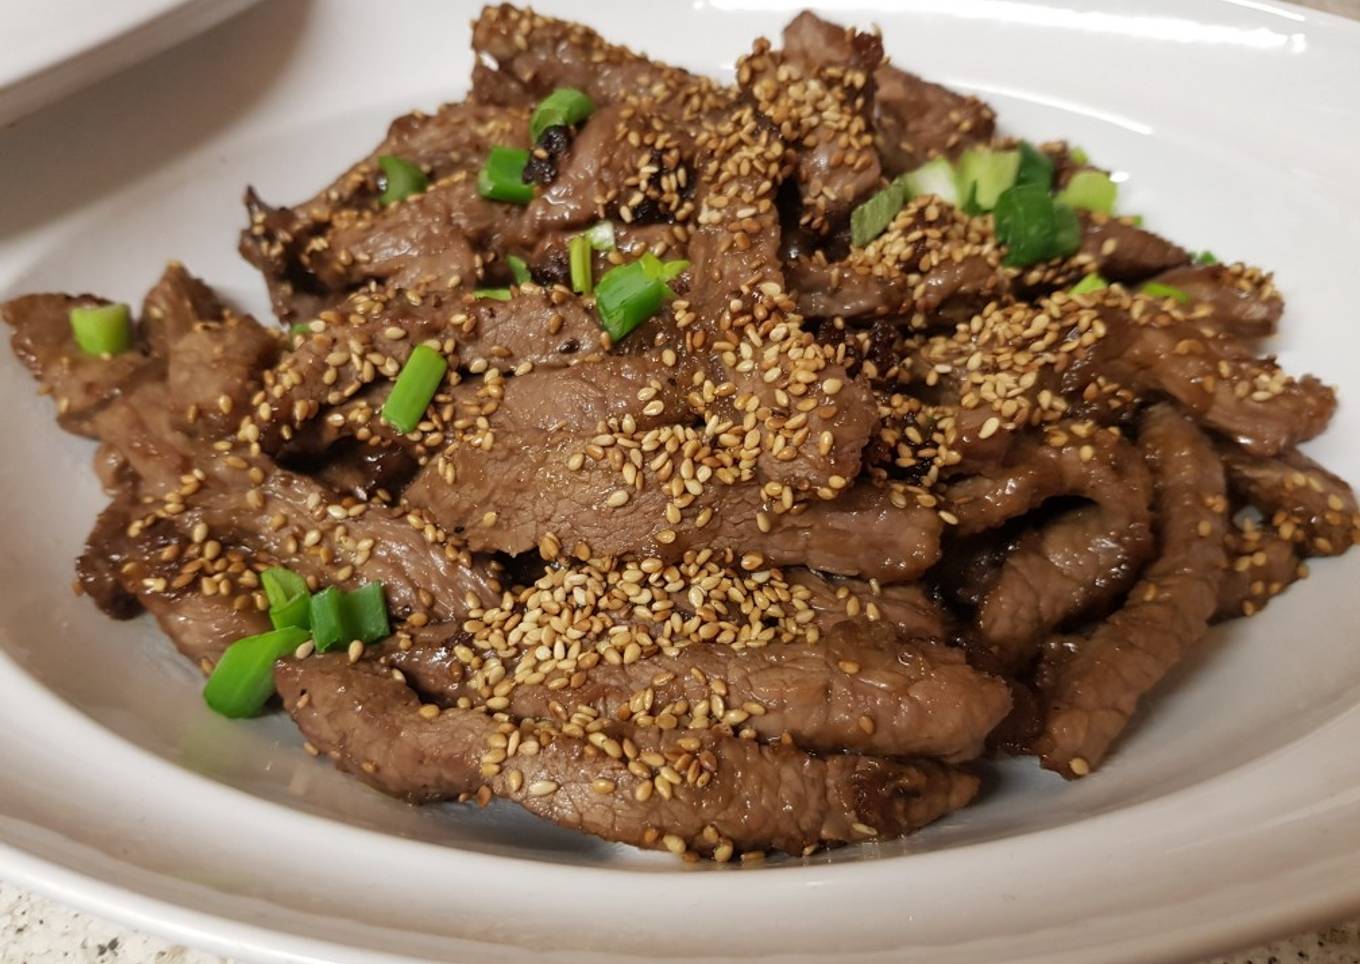 My Crispy Sweet Chilli Beef Salad. With Toasted Sesame seeds 😀